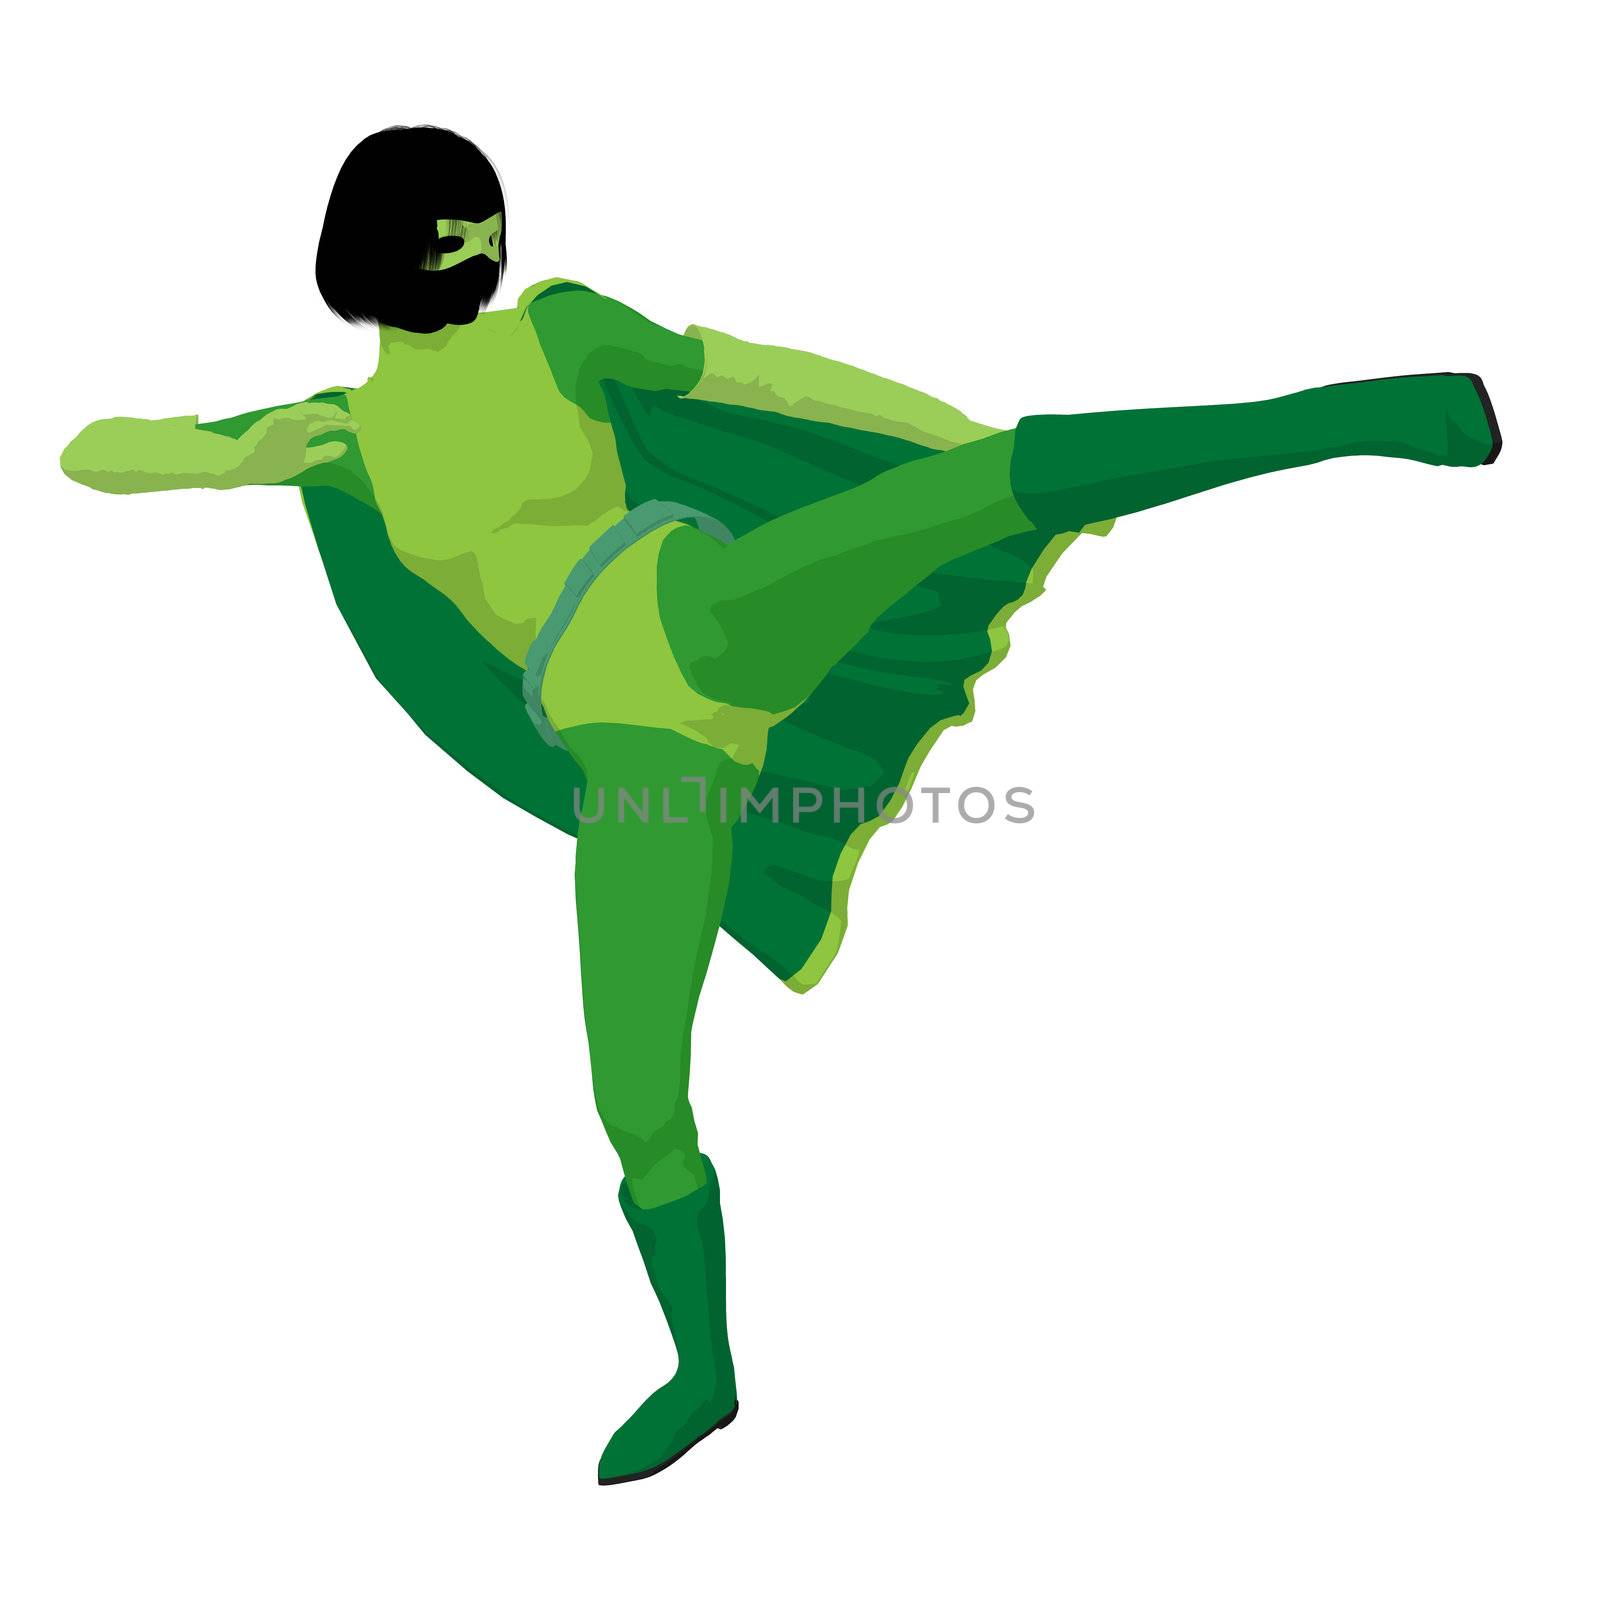 Super heroine silhouette on a white background